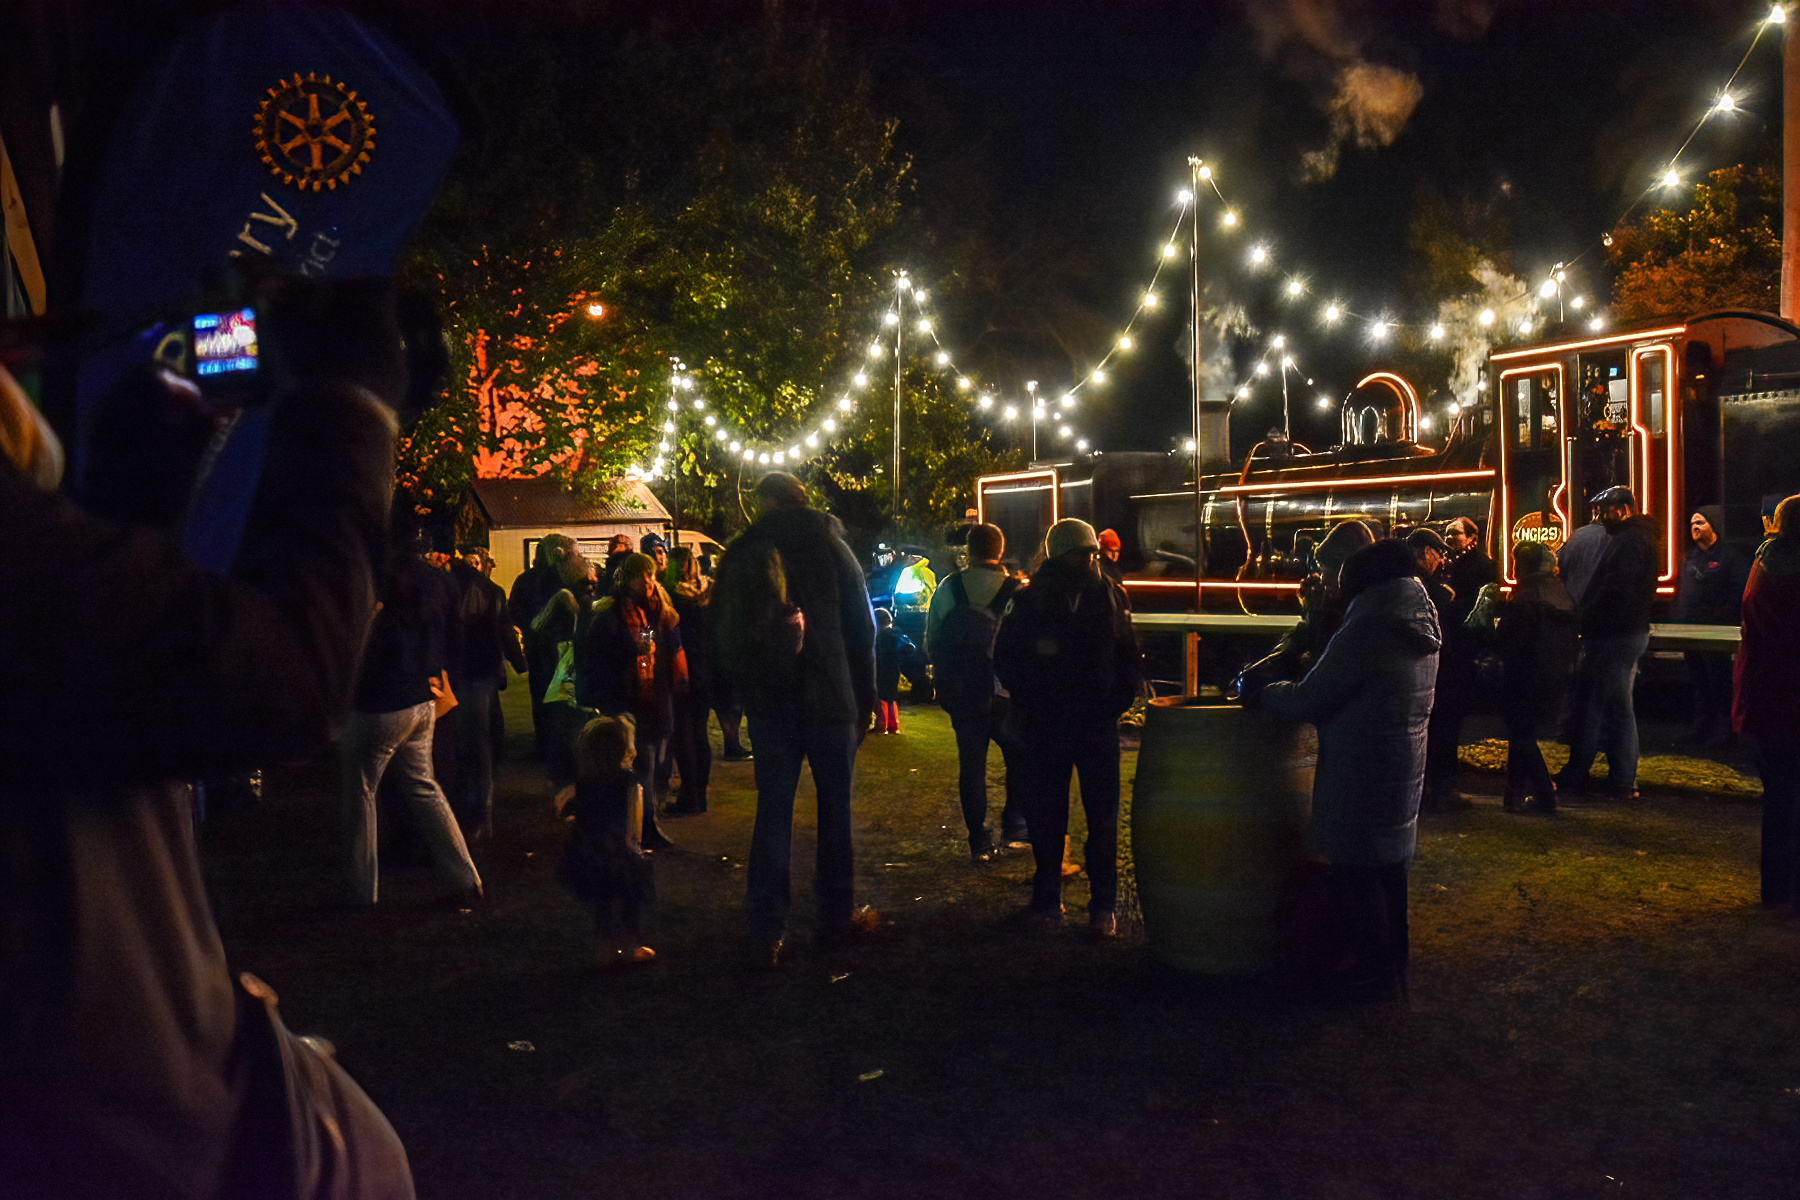 An outdoor area lit with fairy lights. A number of people are standing around the space. A steam locomotive can be seen in the background in front of a lit up water tank.